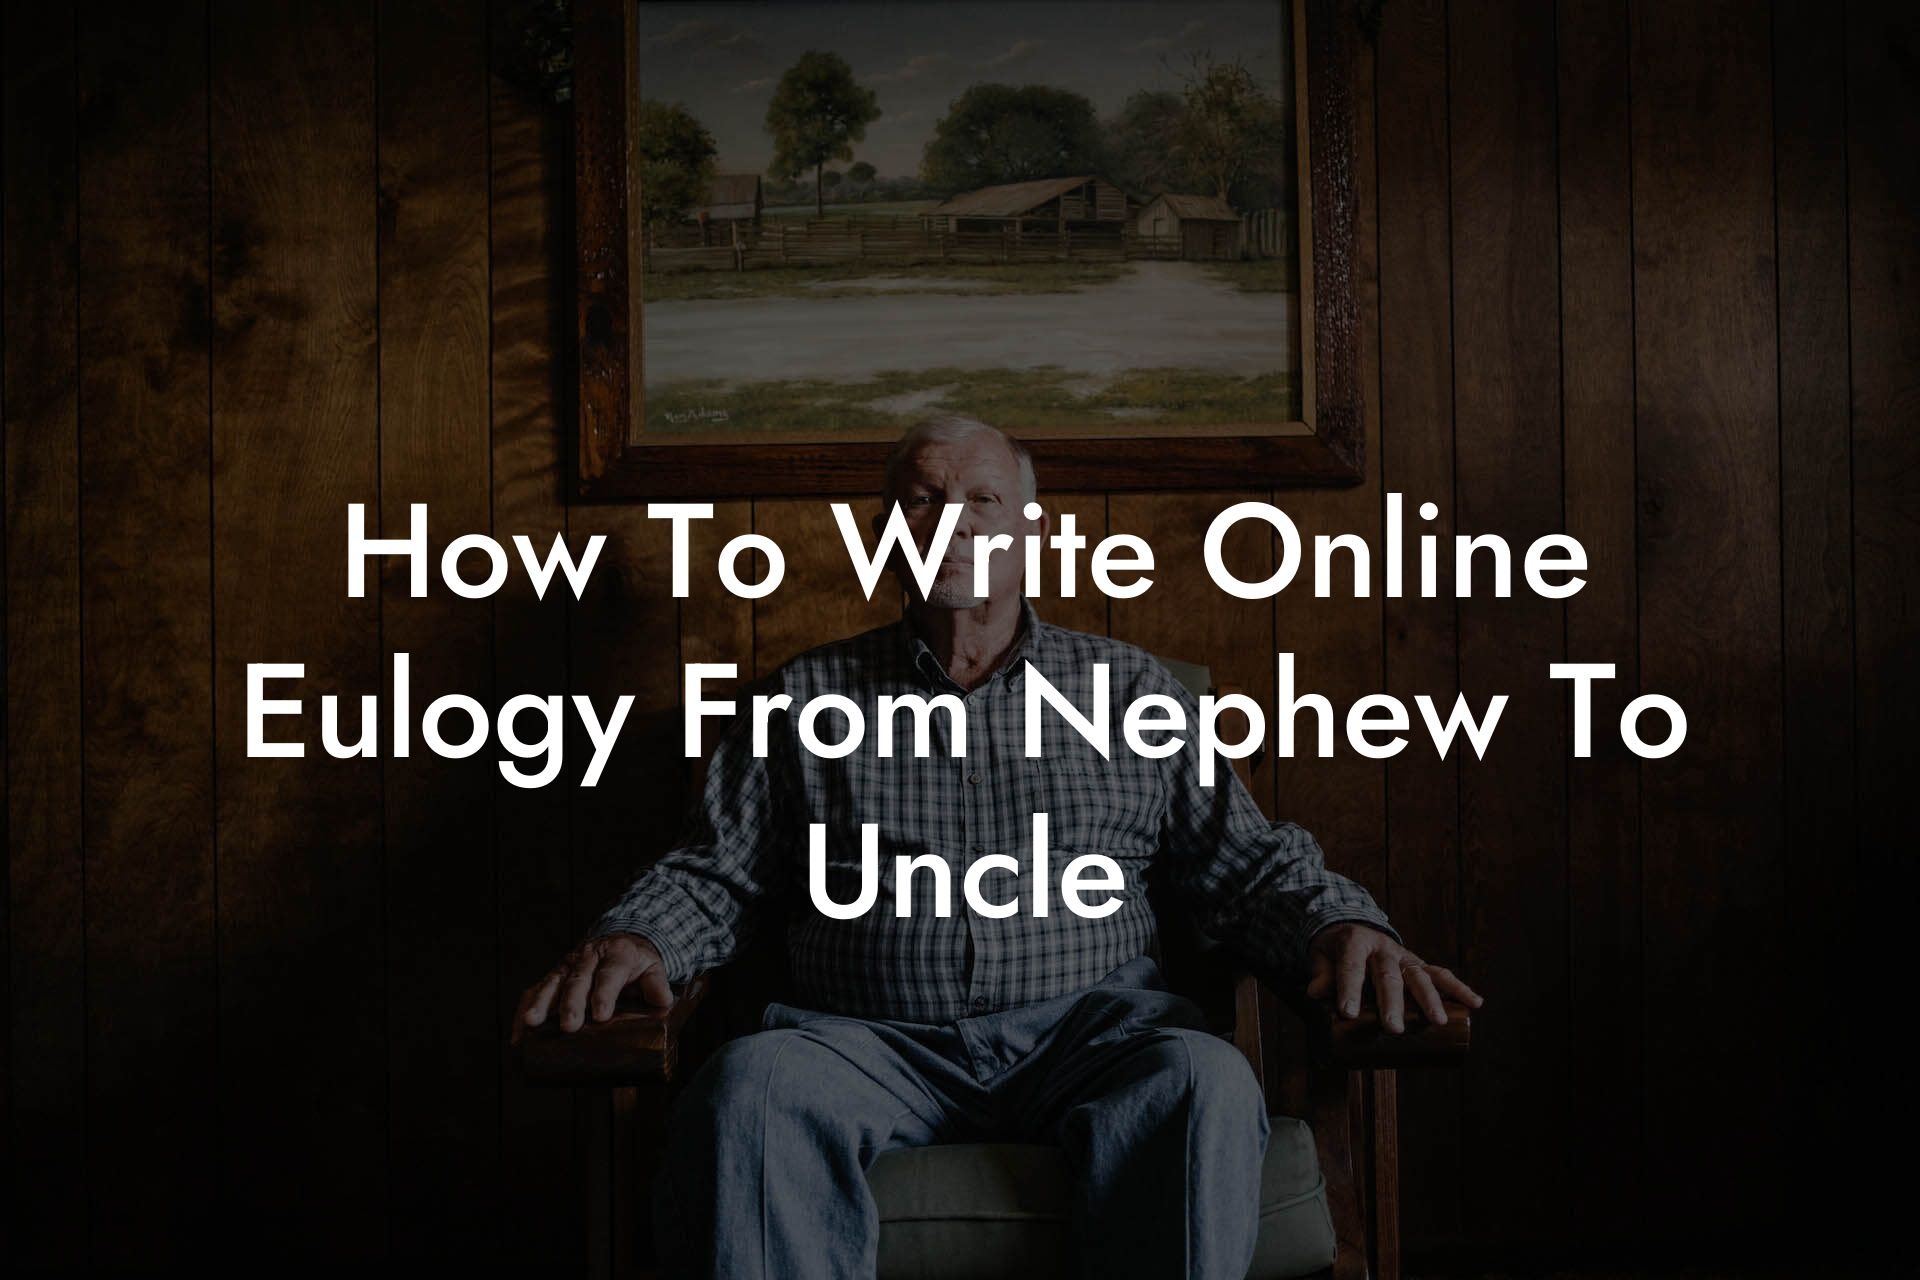 How To Write Online Eulogy From Nephew To Uncle